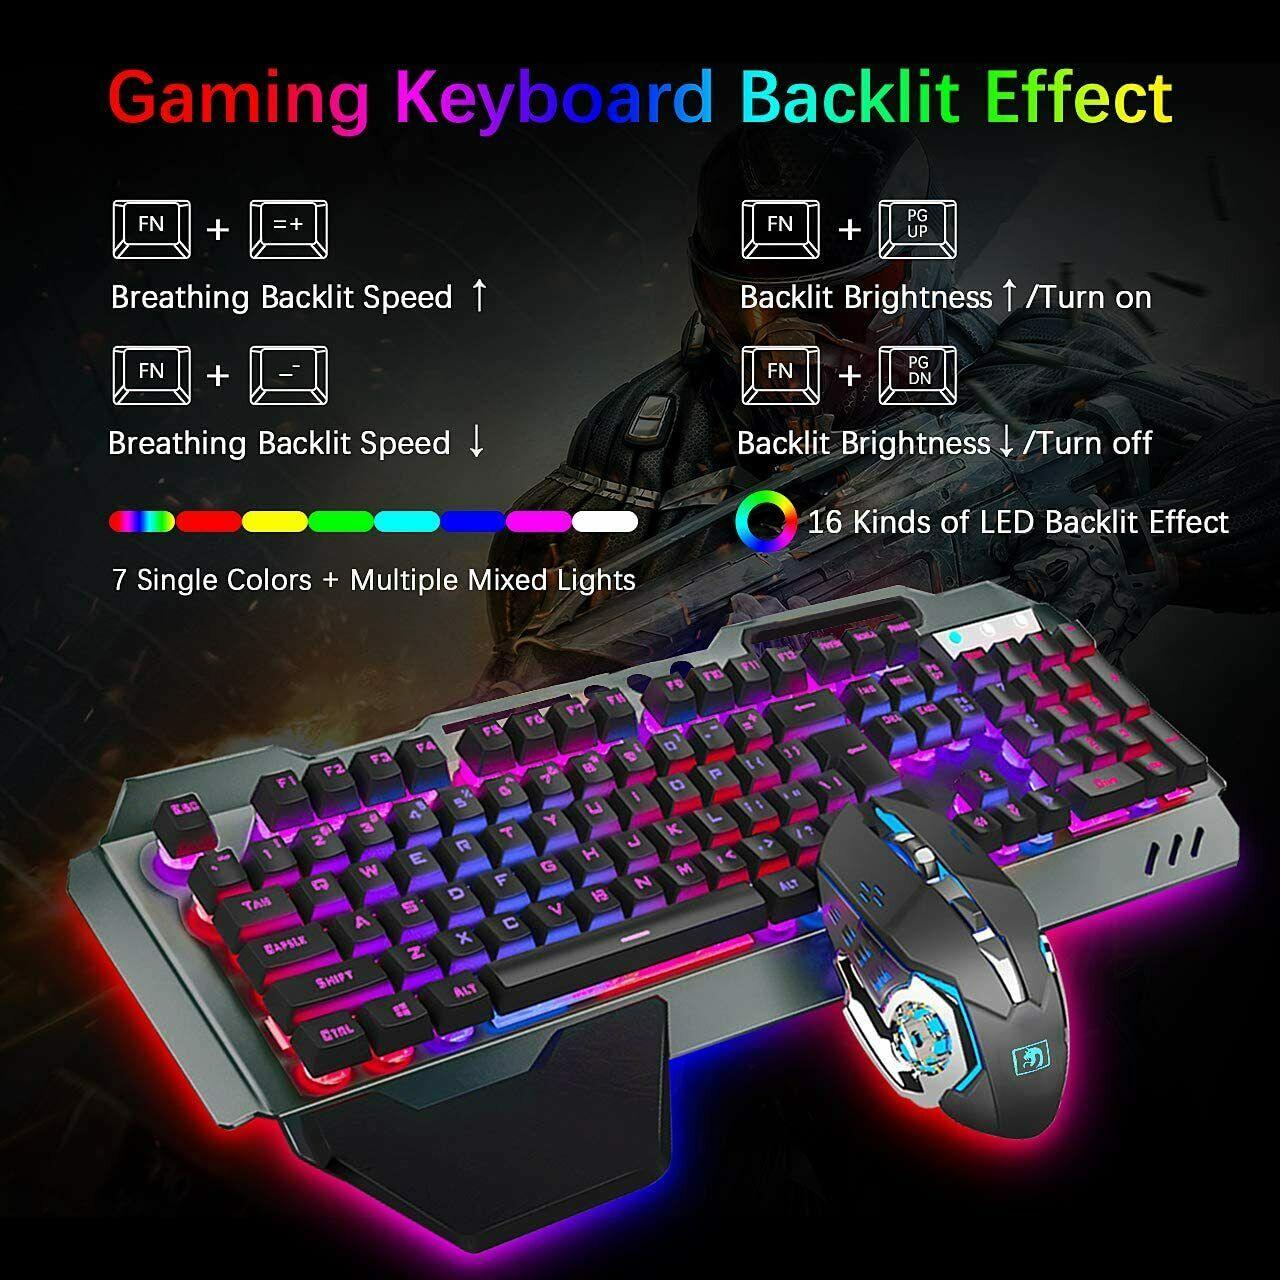 K618 Wired Gaming Keyboard And Mouse Set RGB Backlit For PC Laptop PS4 Xbox One - trendsocialshop